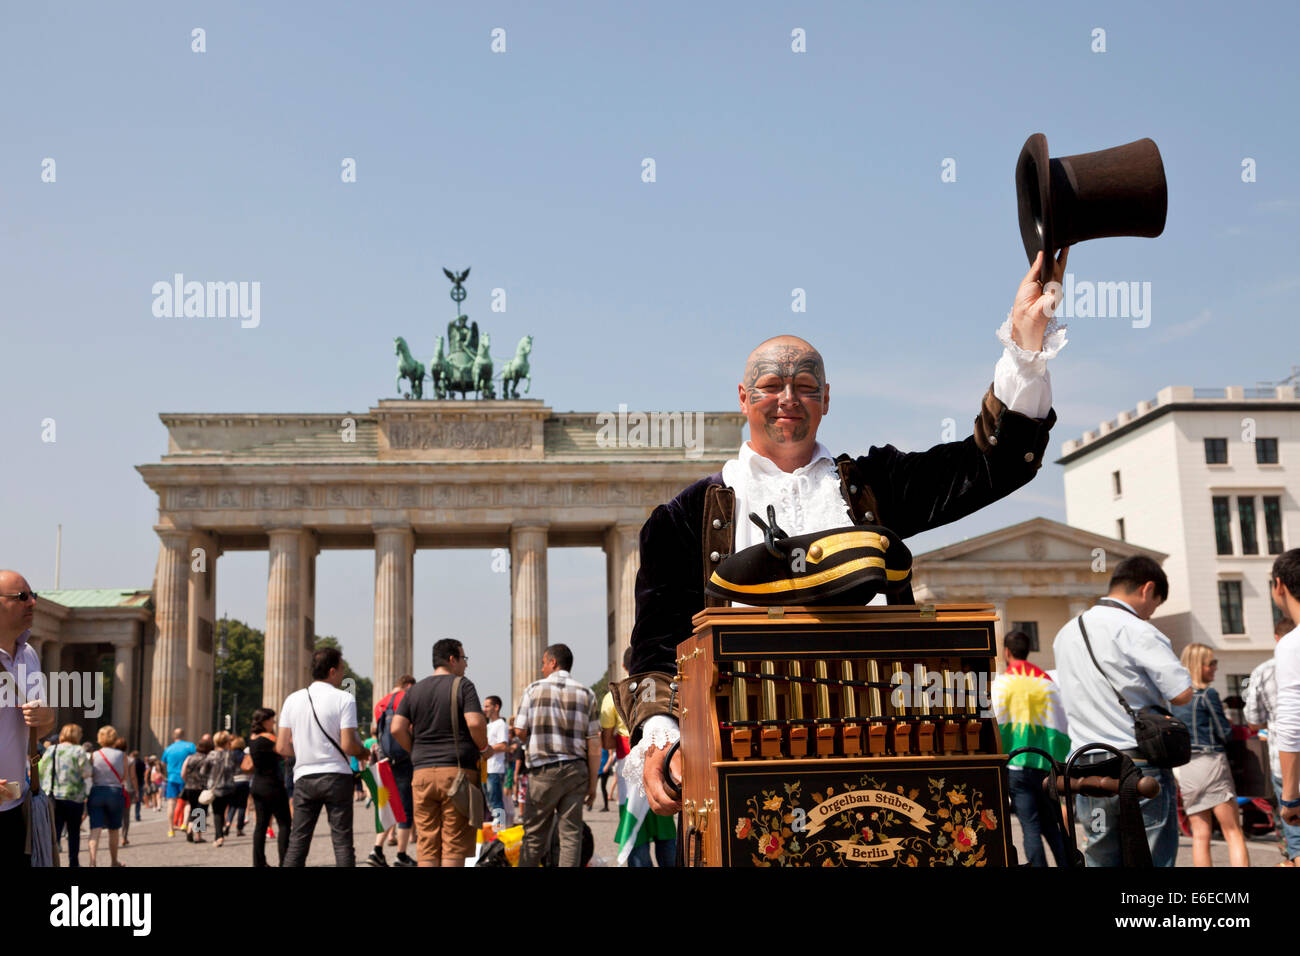 organ grinder with street organ and Top hat in front of the Brandenburg Gate in Berlin, Germany, Europe Stock Photo